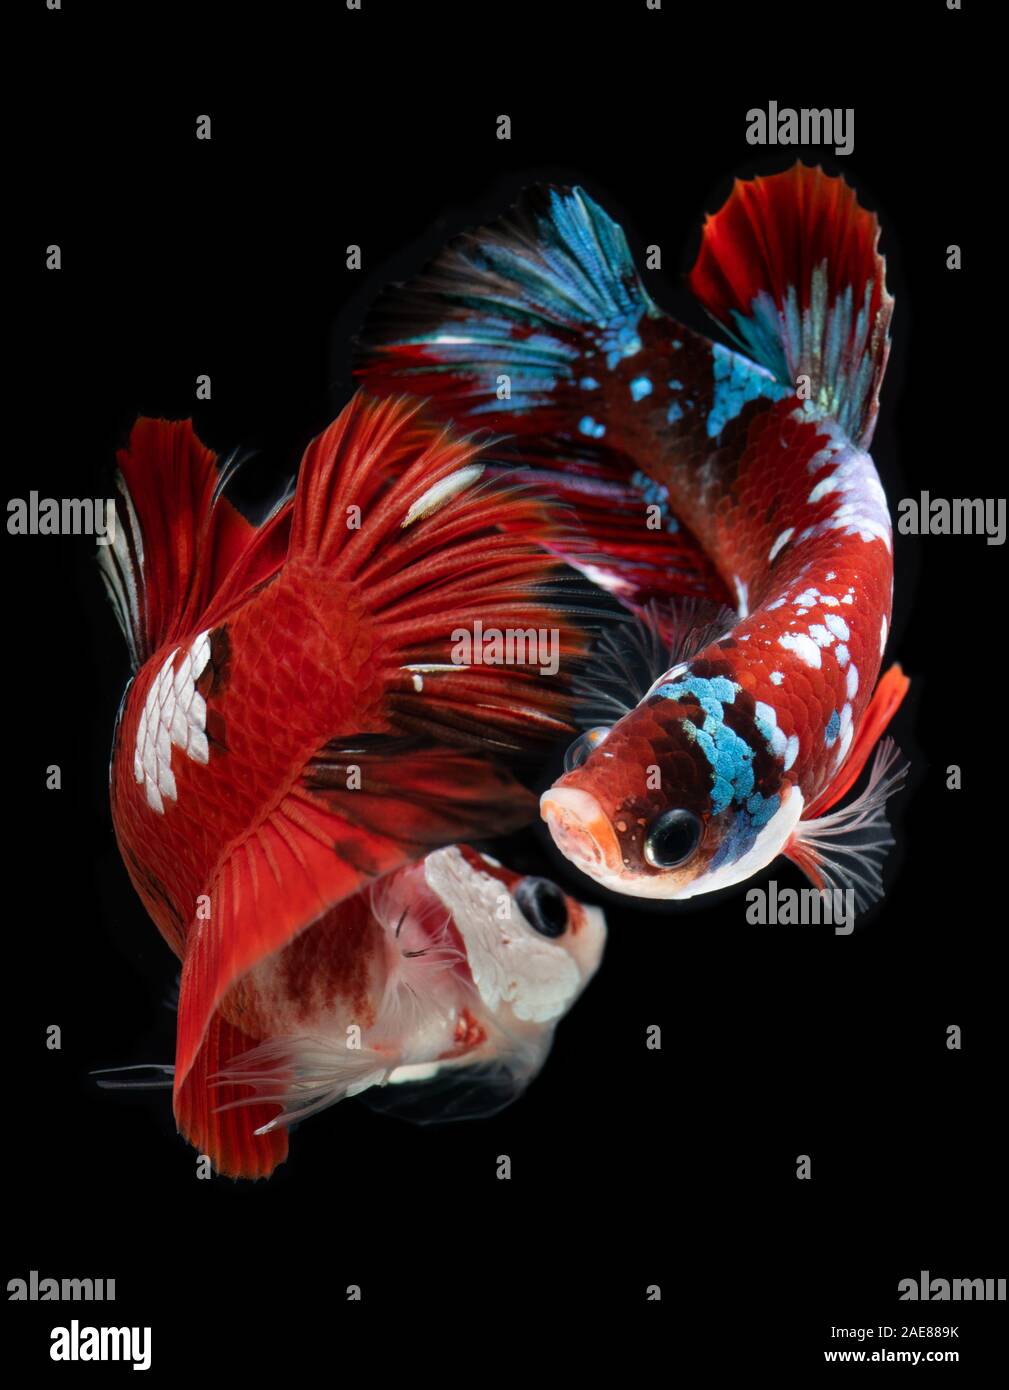 Fancy koi galaxy betta or siamese fighting fish with black background. Stock Photo